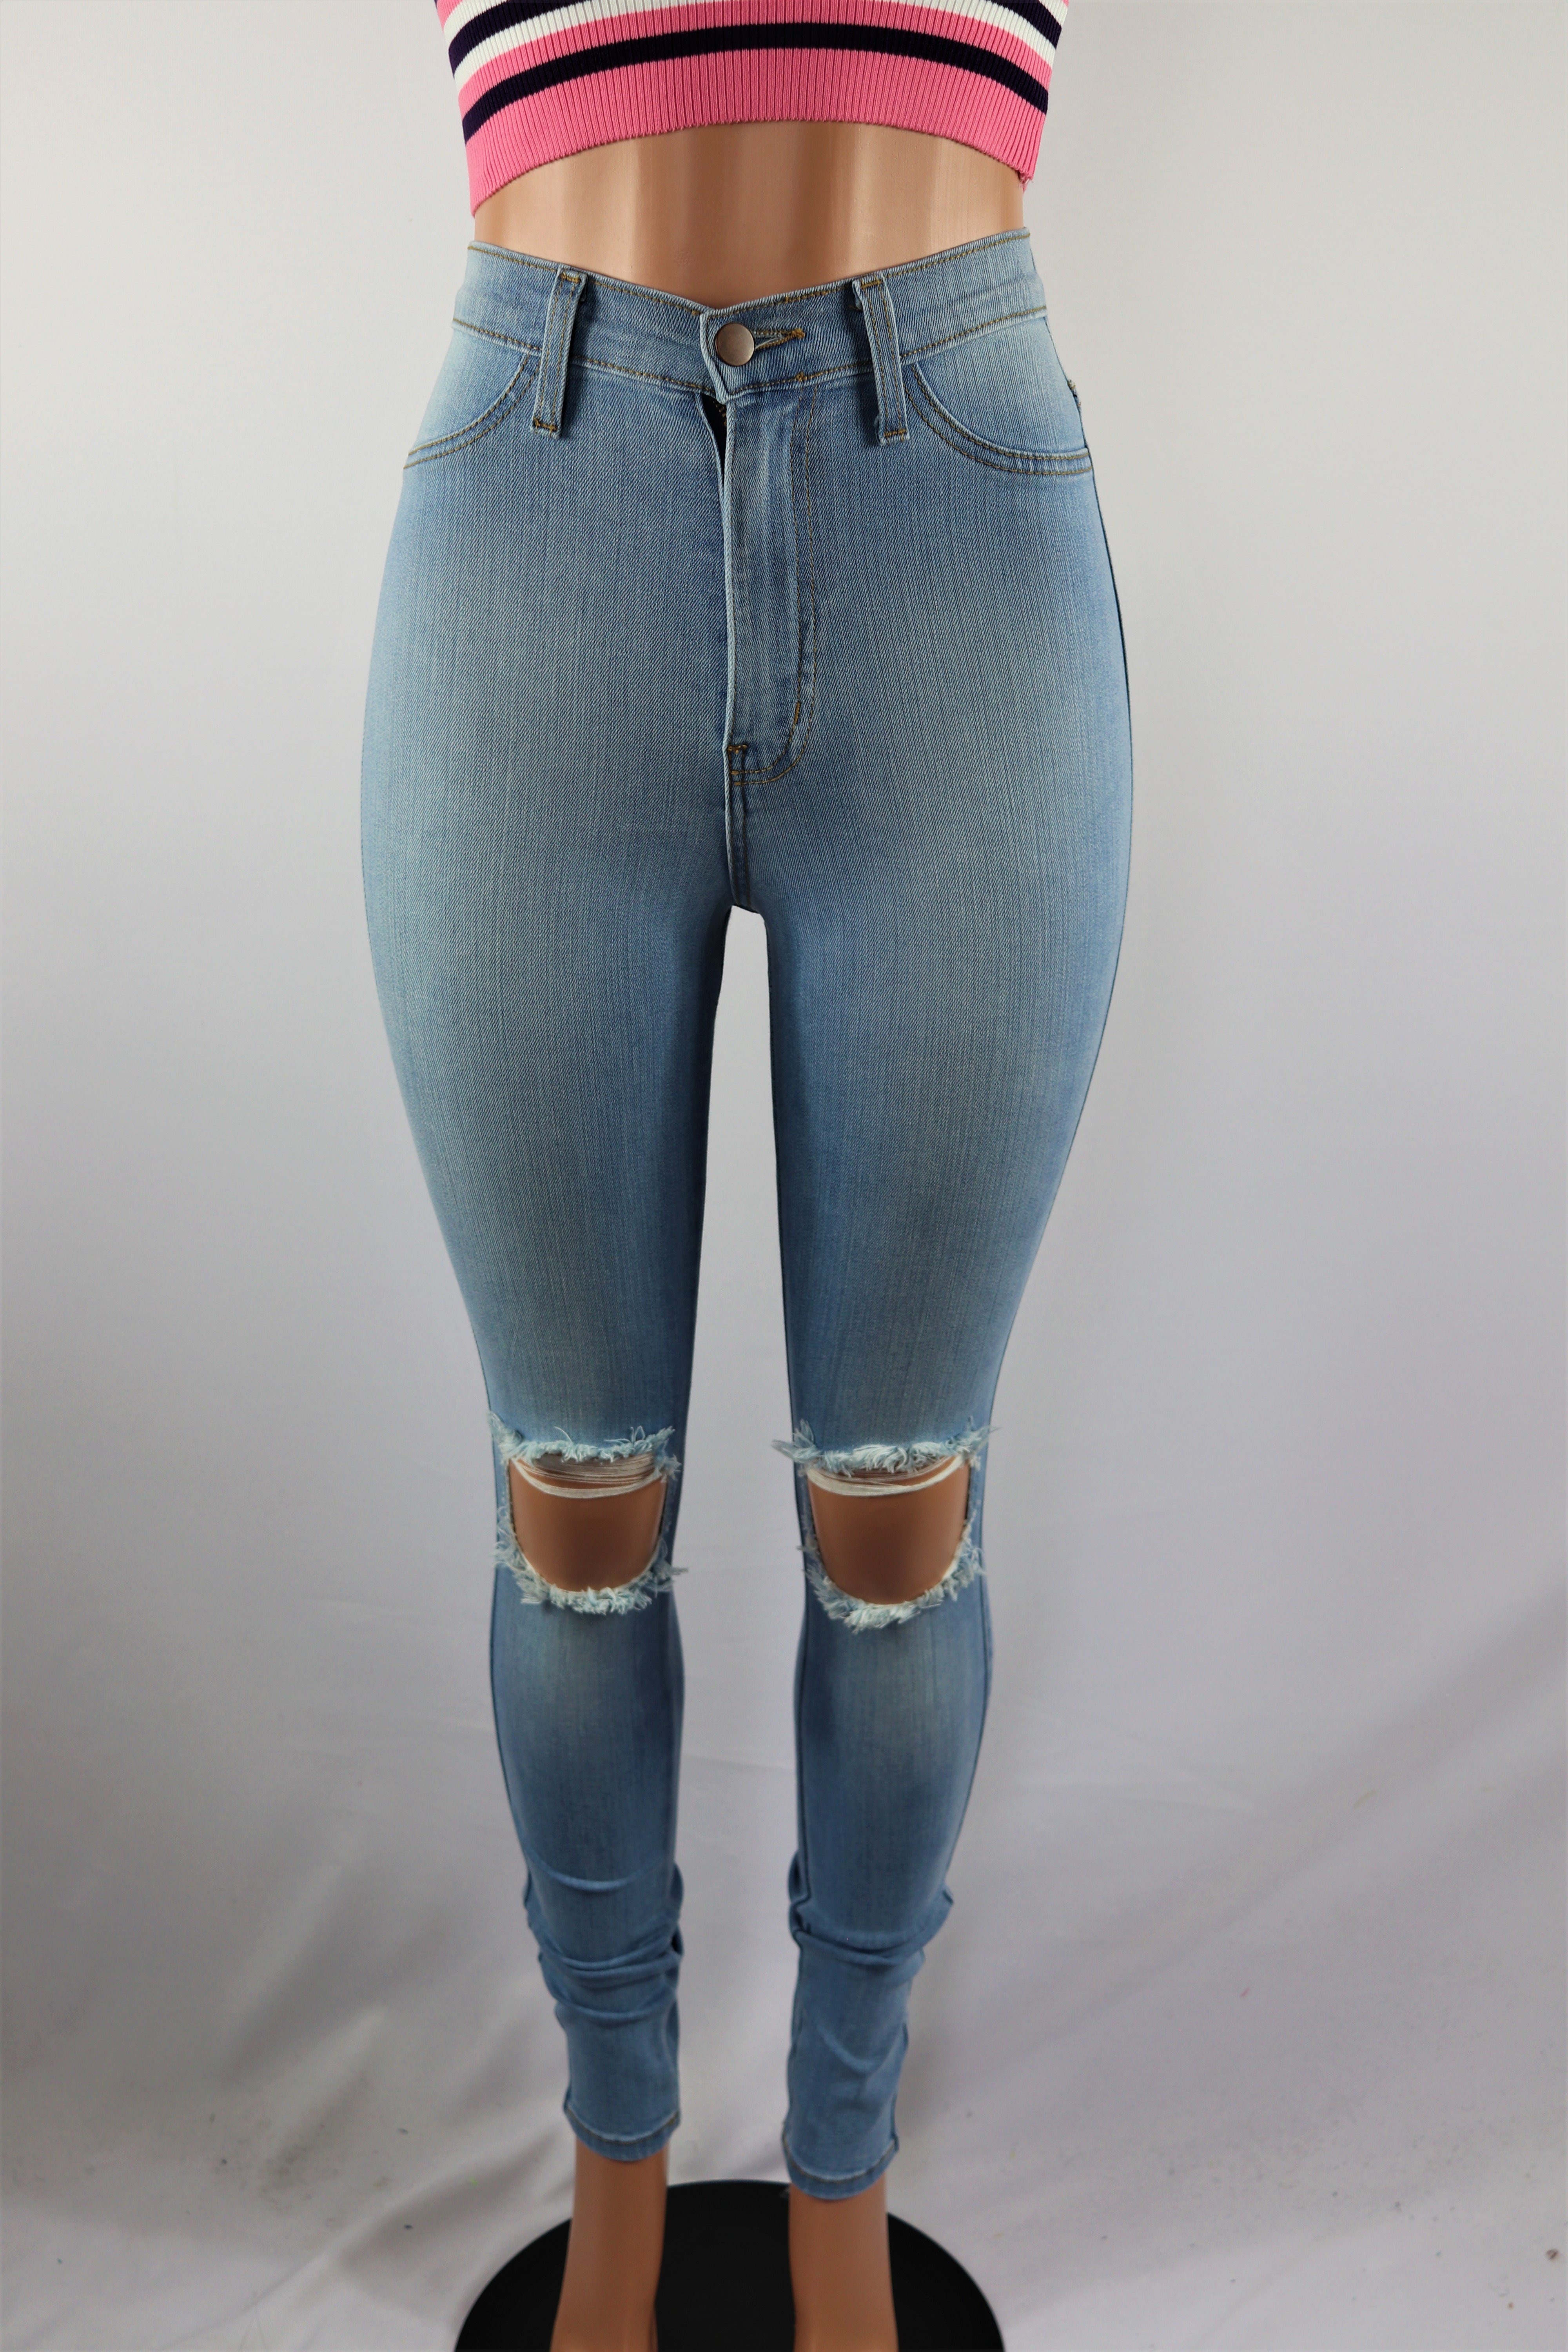 Kenneth Pants - High waisted ripped knee light blue denim jeans pants.